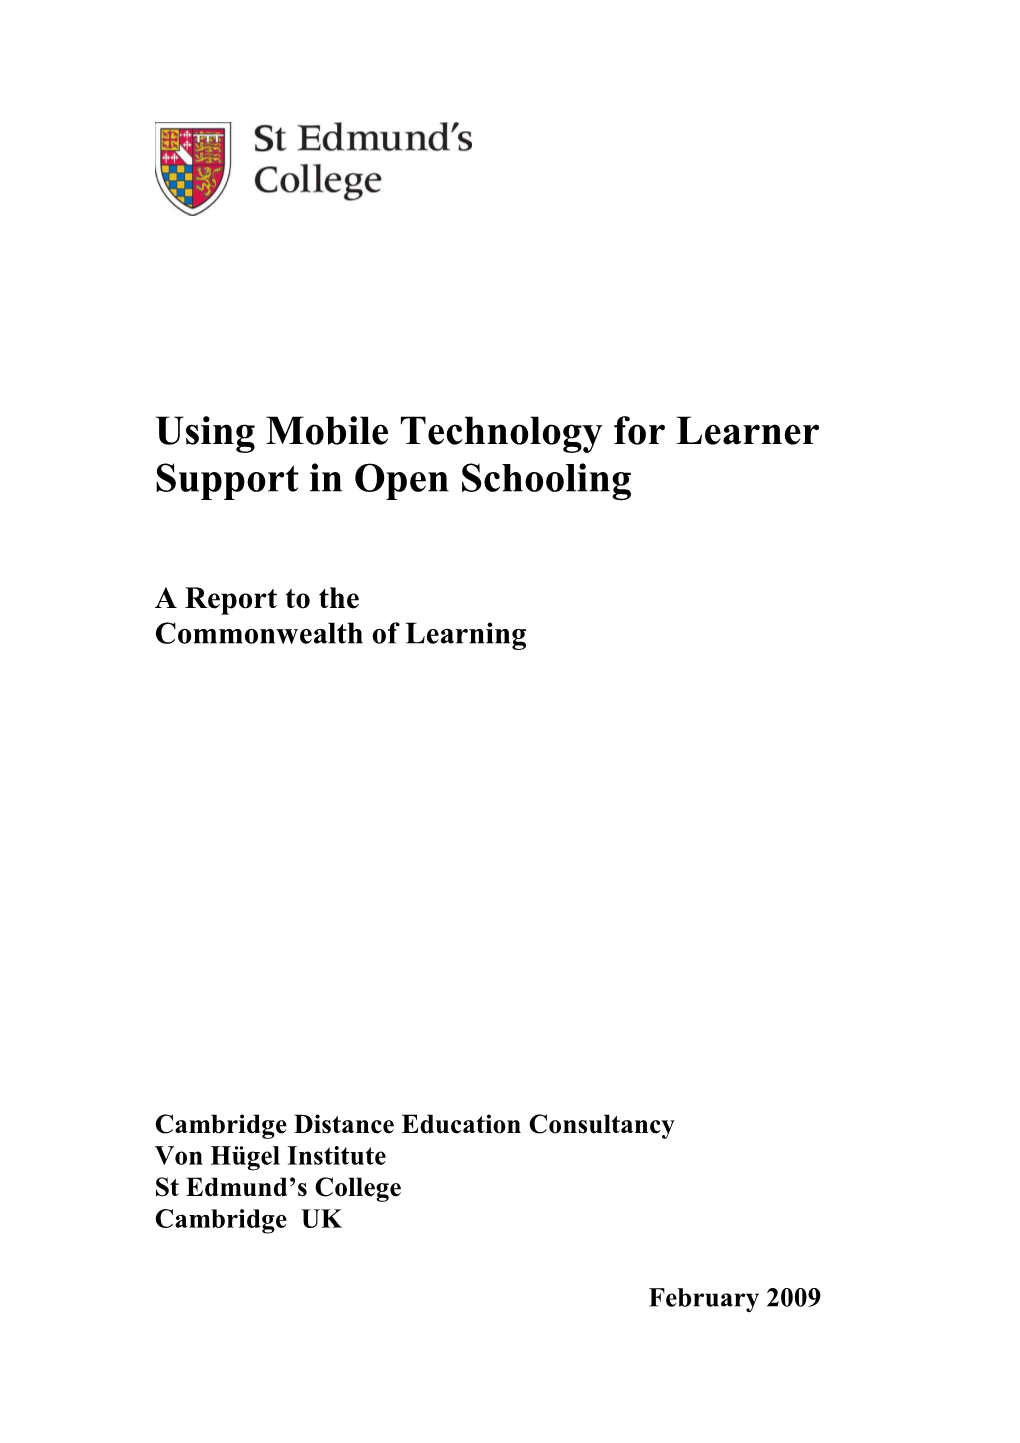 Using Mobile Technology for Learner Support in Open Schooling